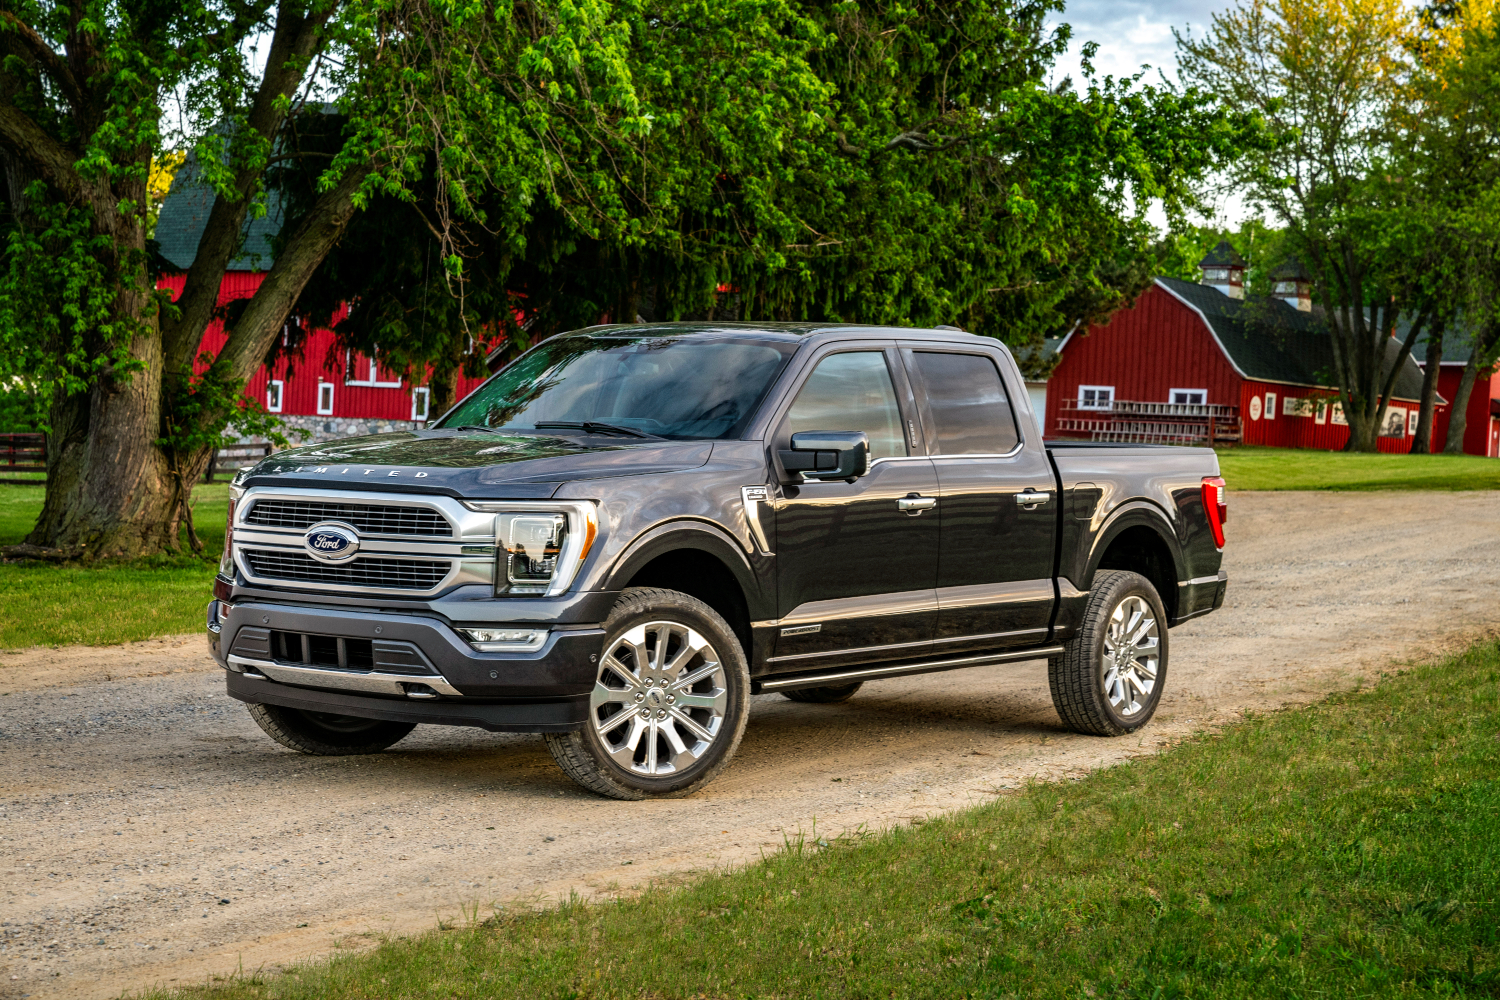 The Ford F-150 is one of Consumer Reports worst SUVs and trucks for short drivers